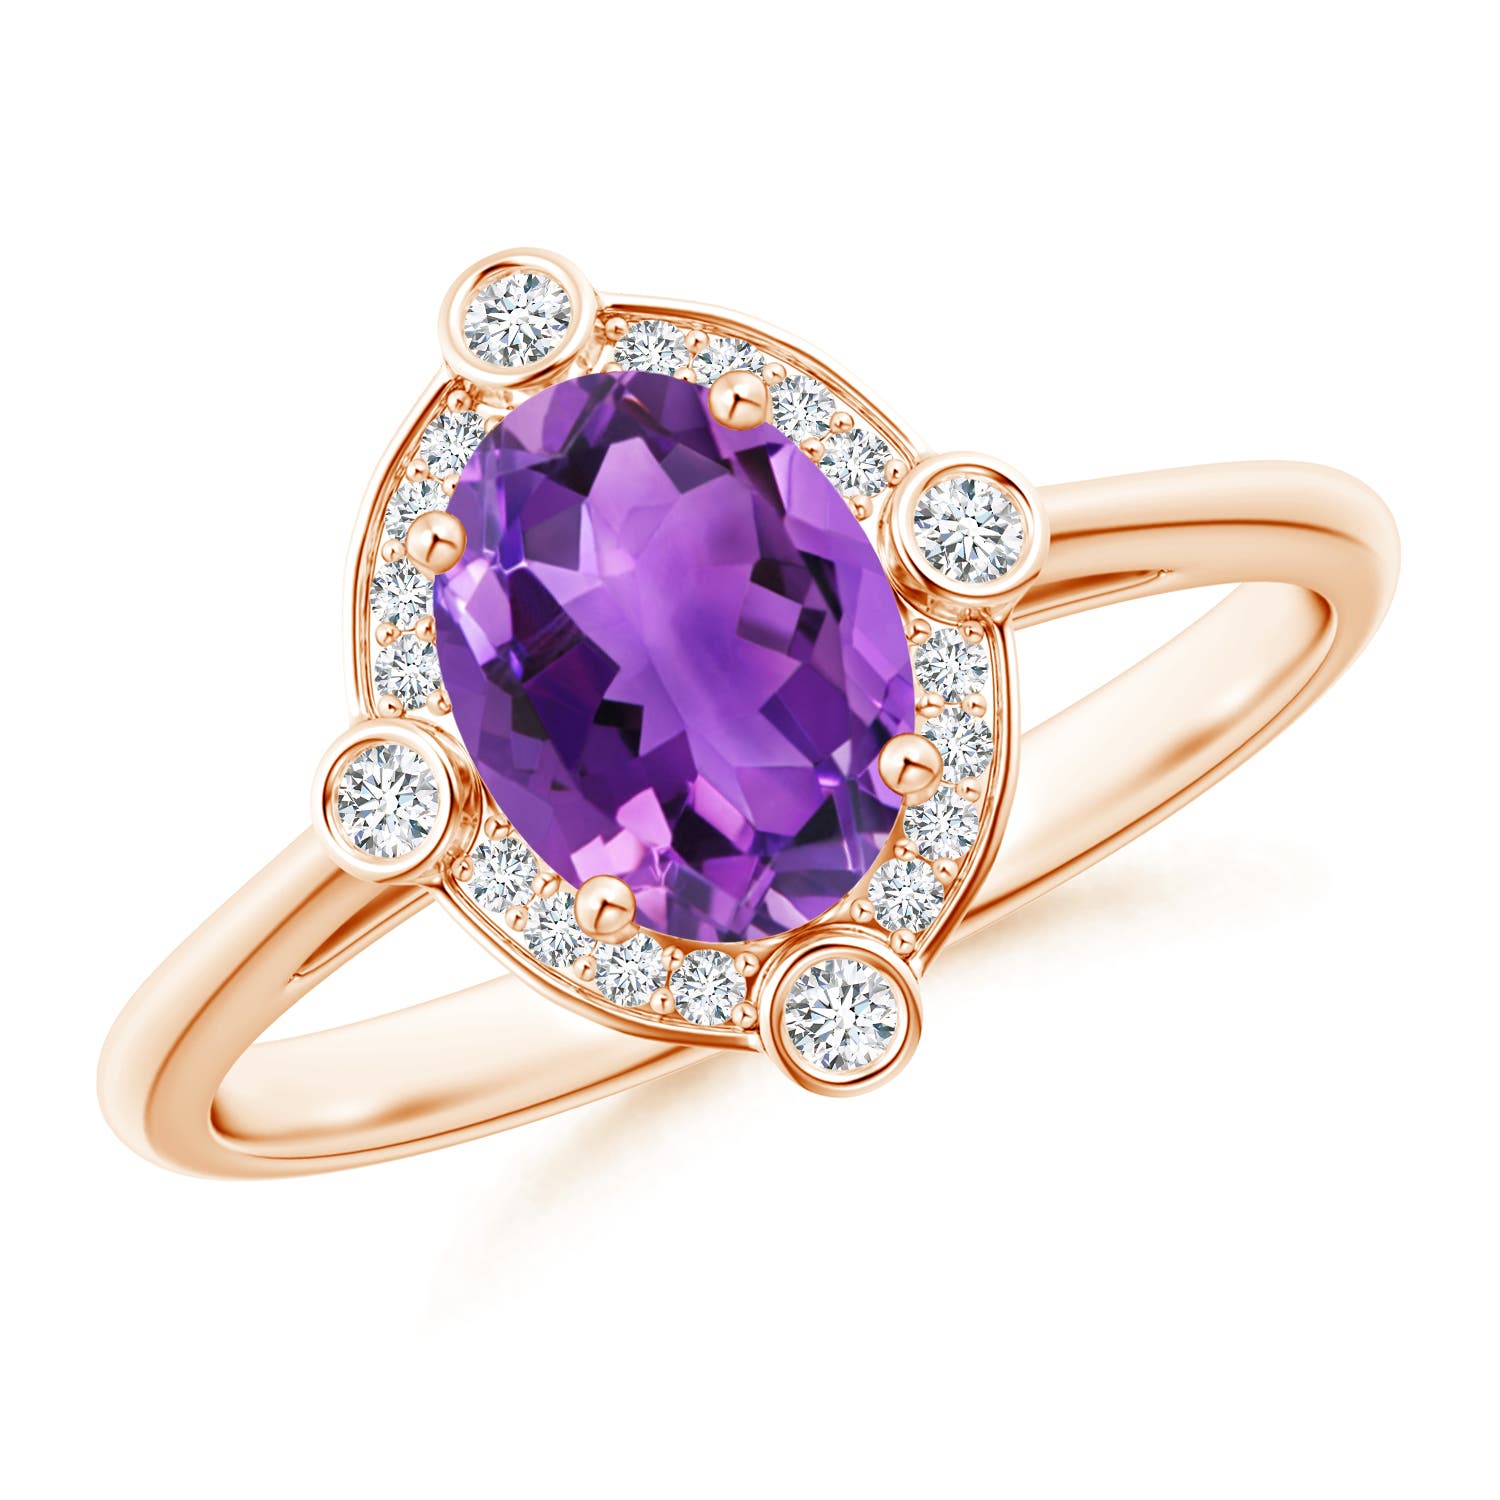 AAA - Amethyst / 1.29 CT / 14 KT Rose Gold